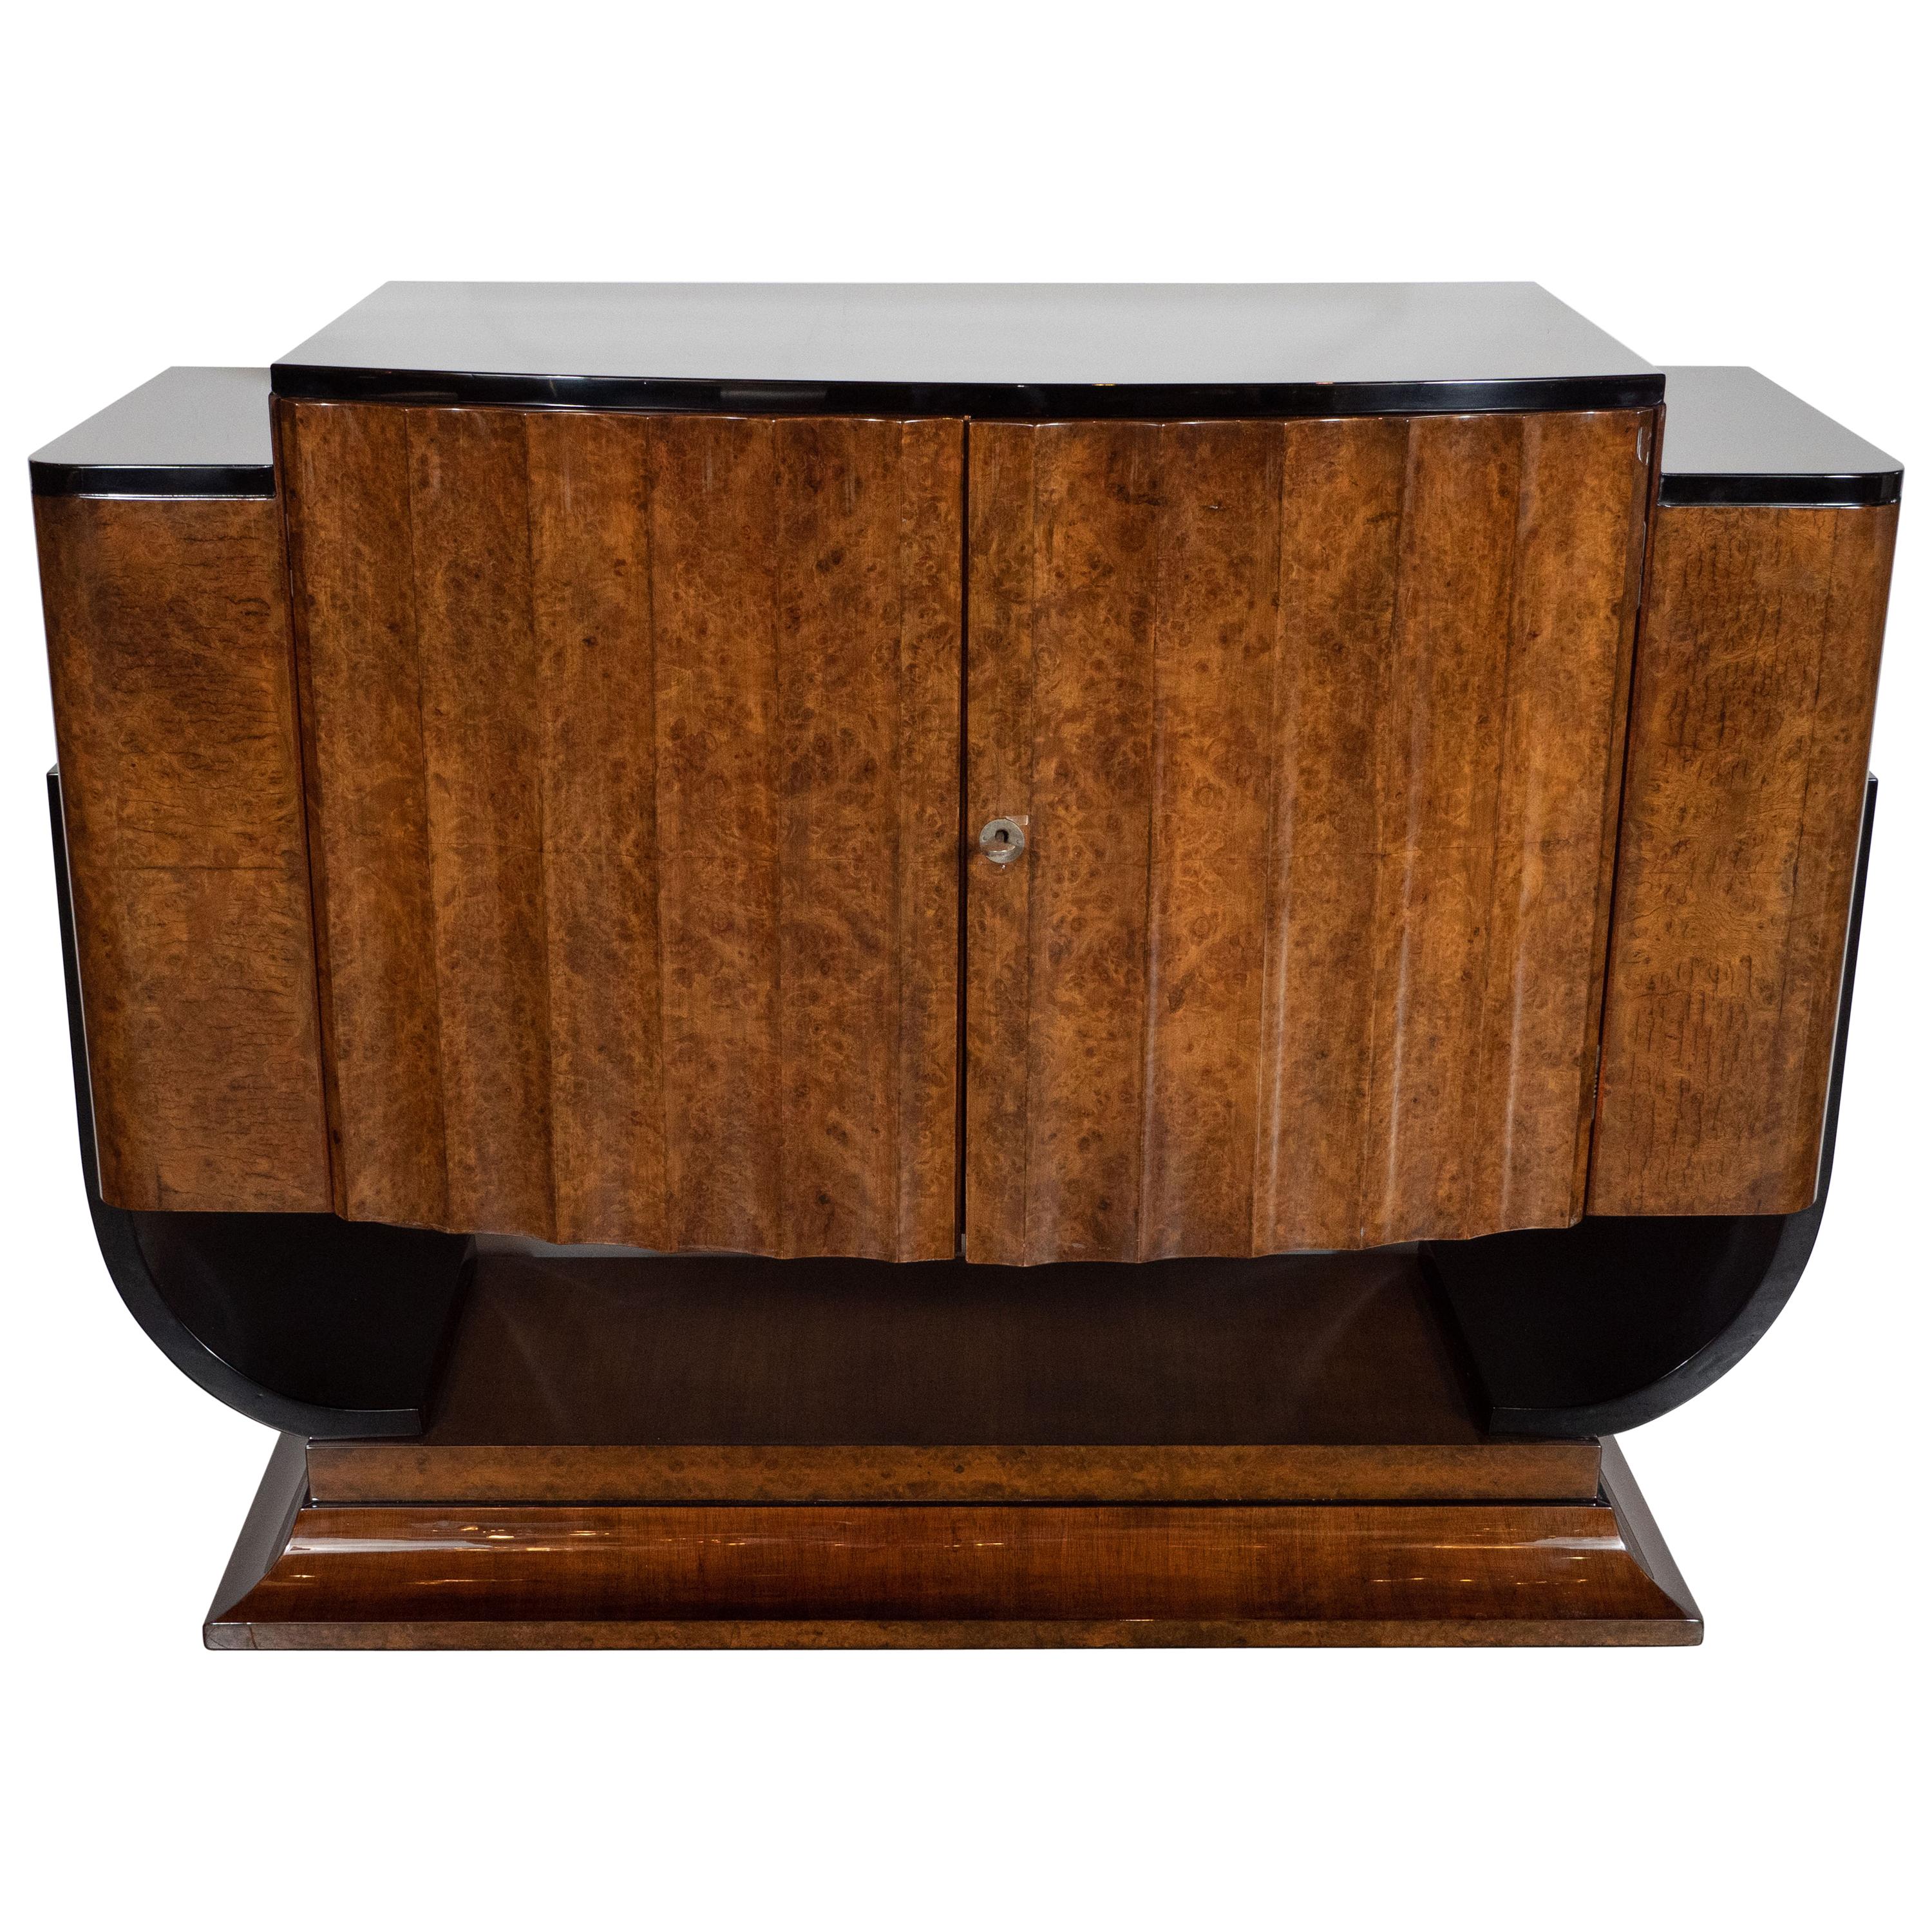 English Art Deco Streamlined Black Lacquer and Burled Carpathian Elm Cabinet